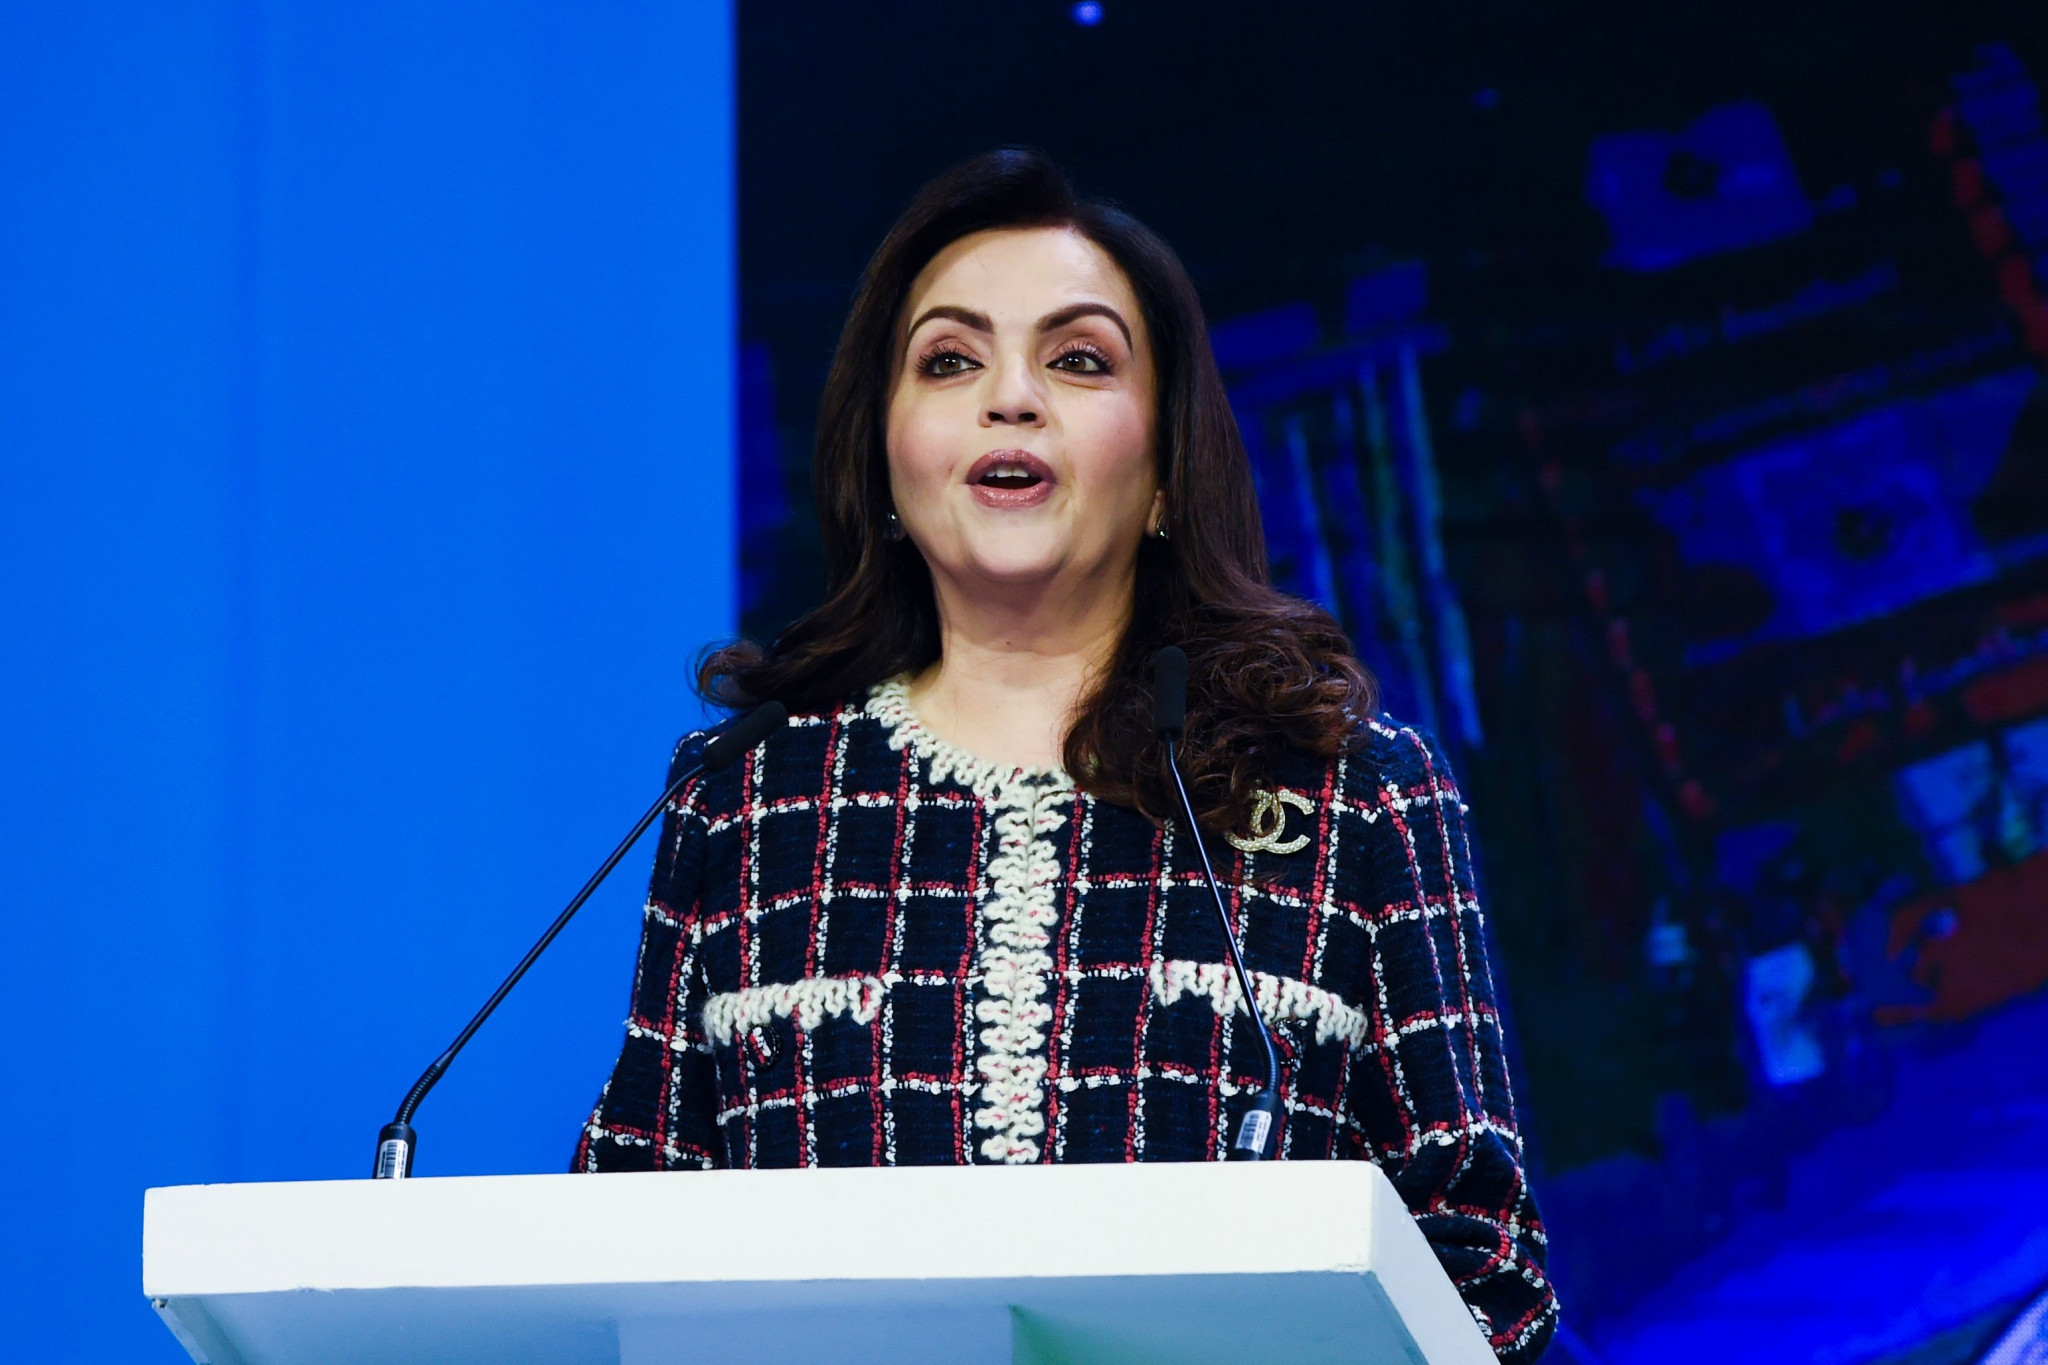 IOC member Nita Ambani claims that the draft constitution "paves the way for India to achieve our true potential in sport" ©Getty Images